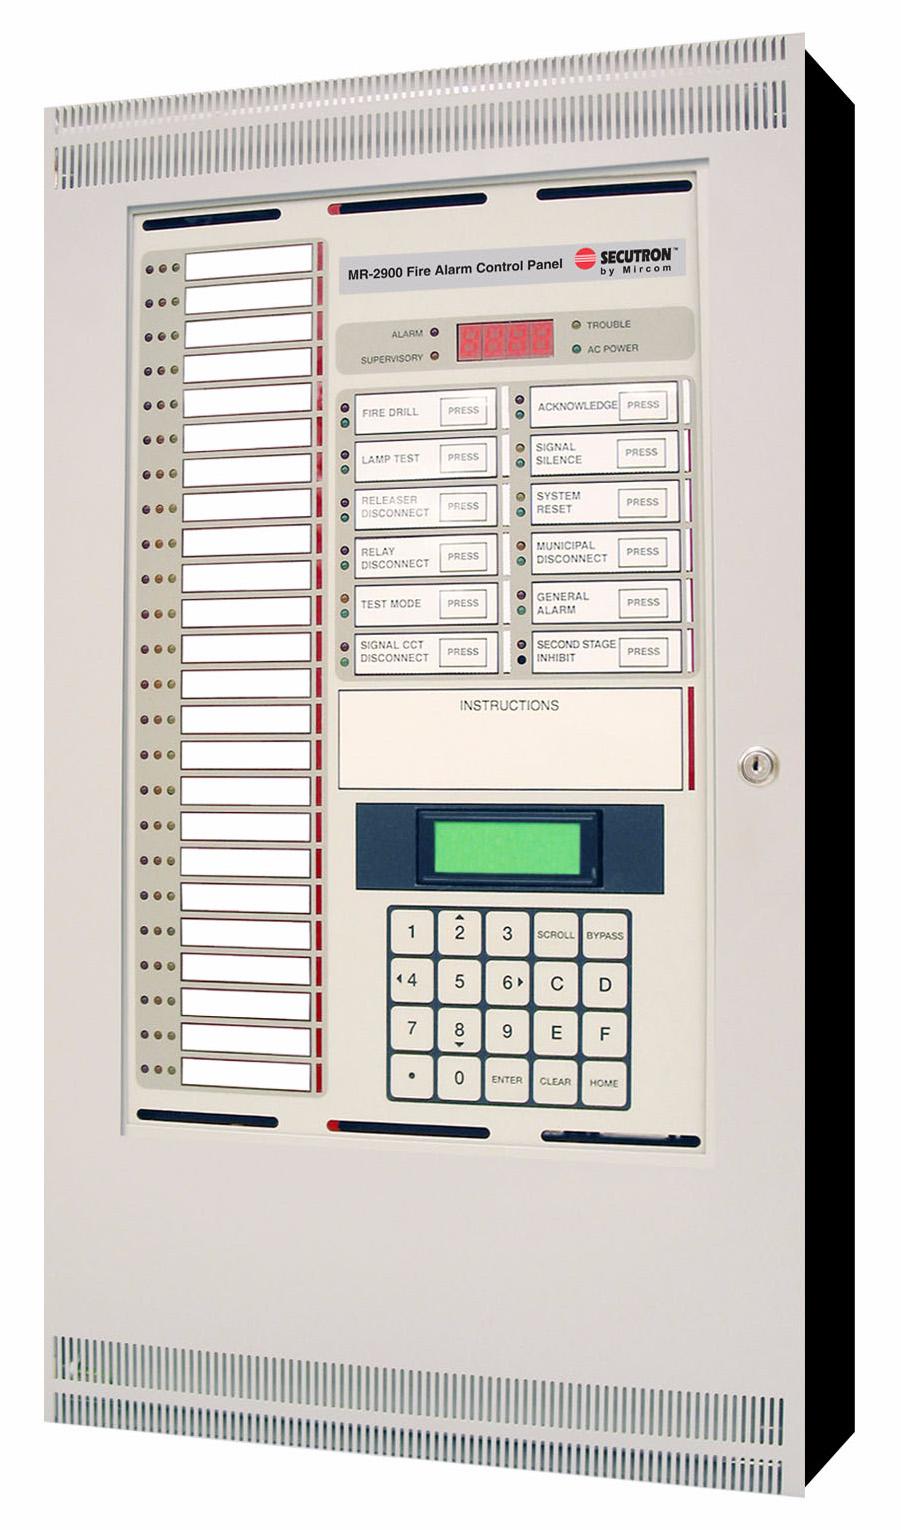 MR-2900 Installation Manual 1.3 Front Panel The system controls consist of 12 system switches and a 20 position alphanumeric keypad.